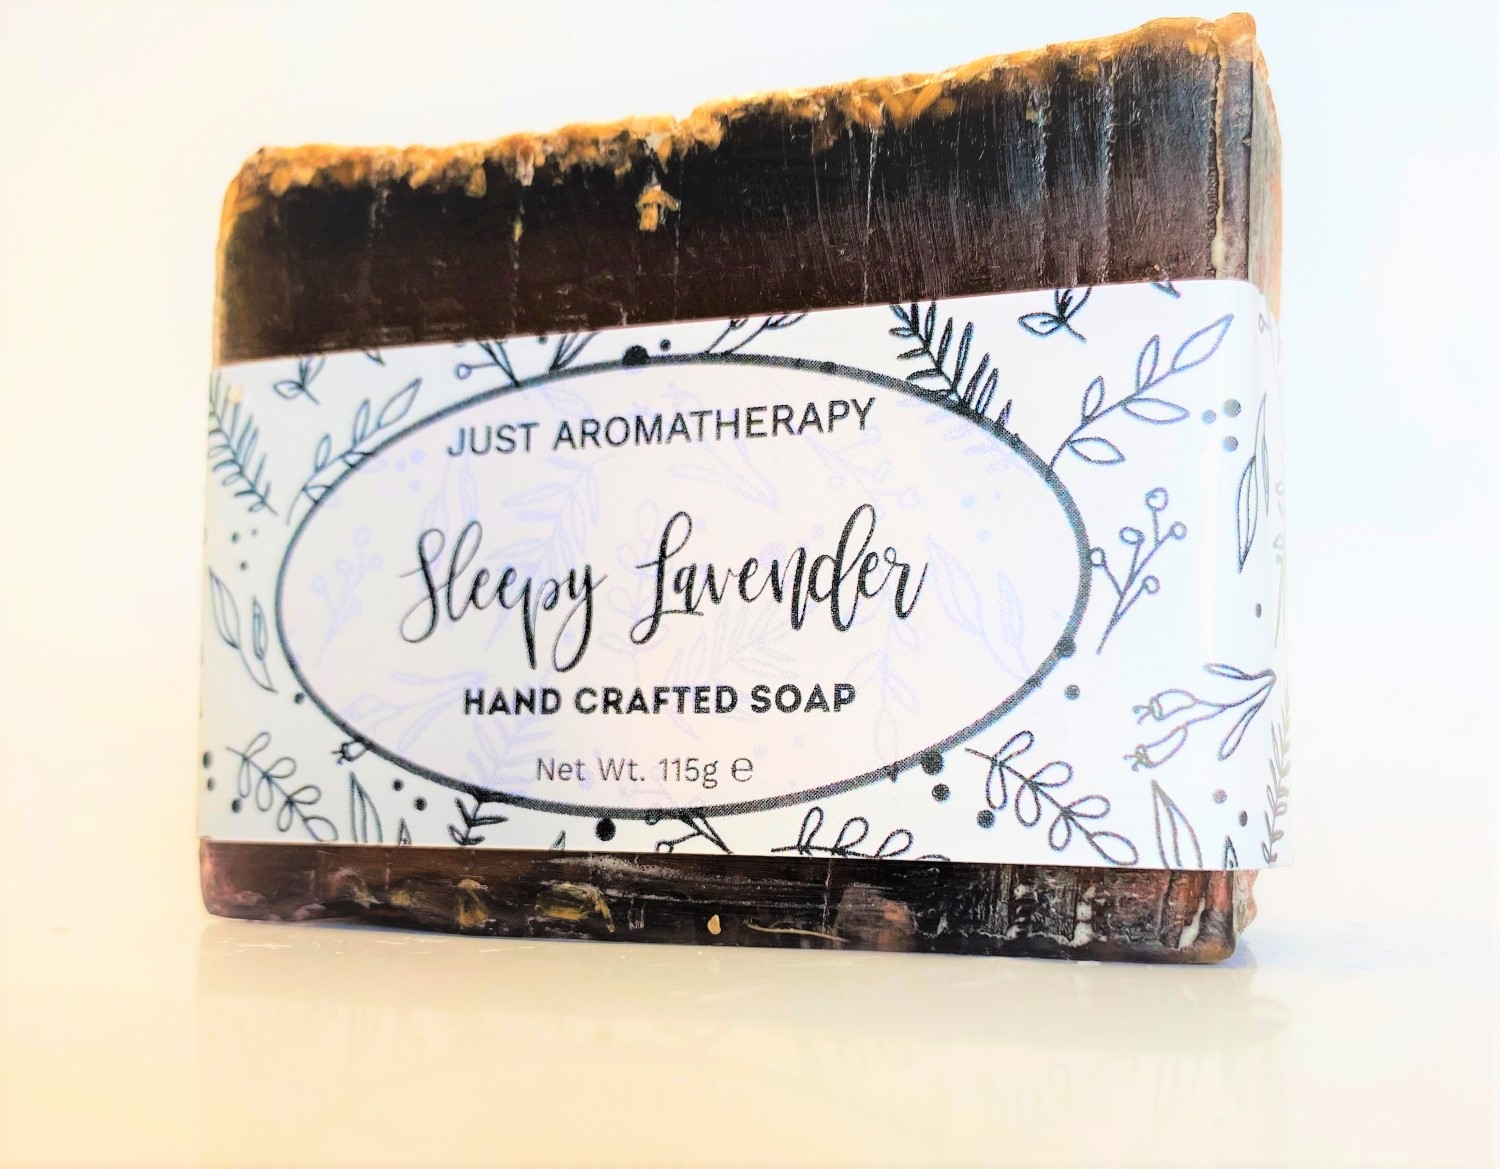 Sleepy Lavender - Wild & Natural Hand Crafted Soap